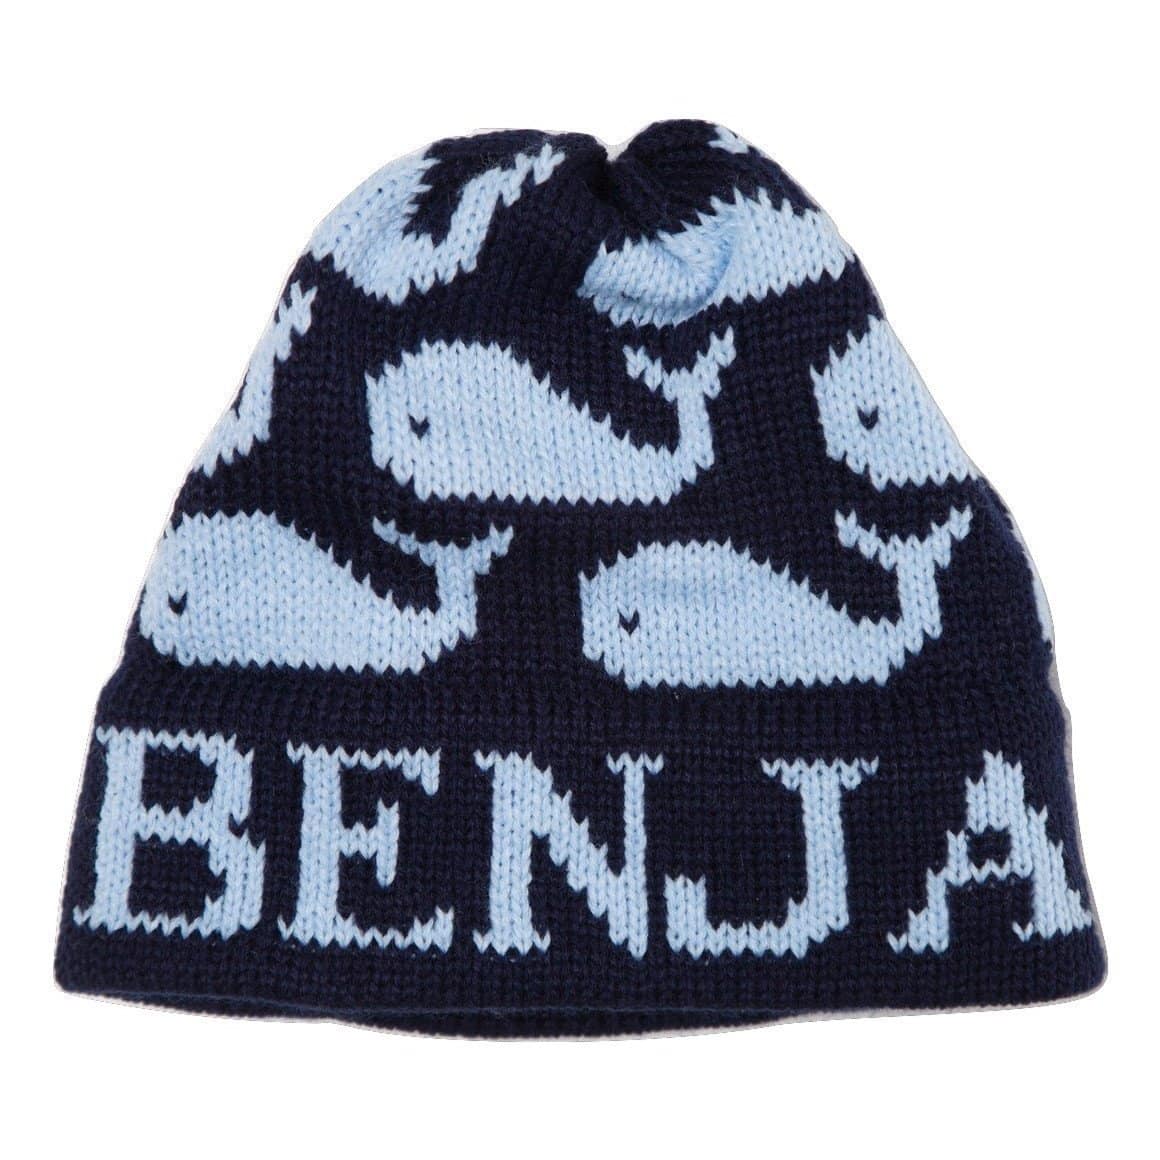 Many Whales Personalized Knit Hat-Hats-Jack and Jill Boutique